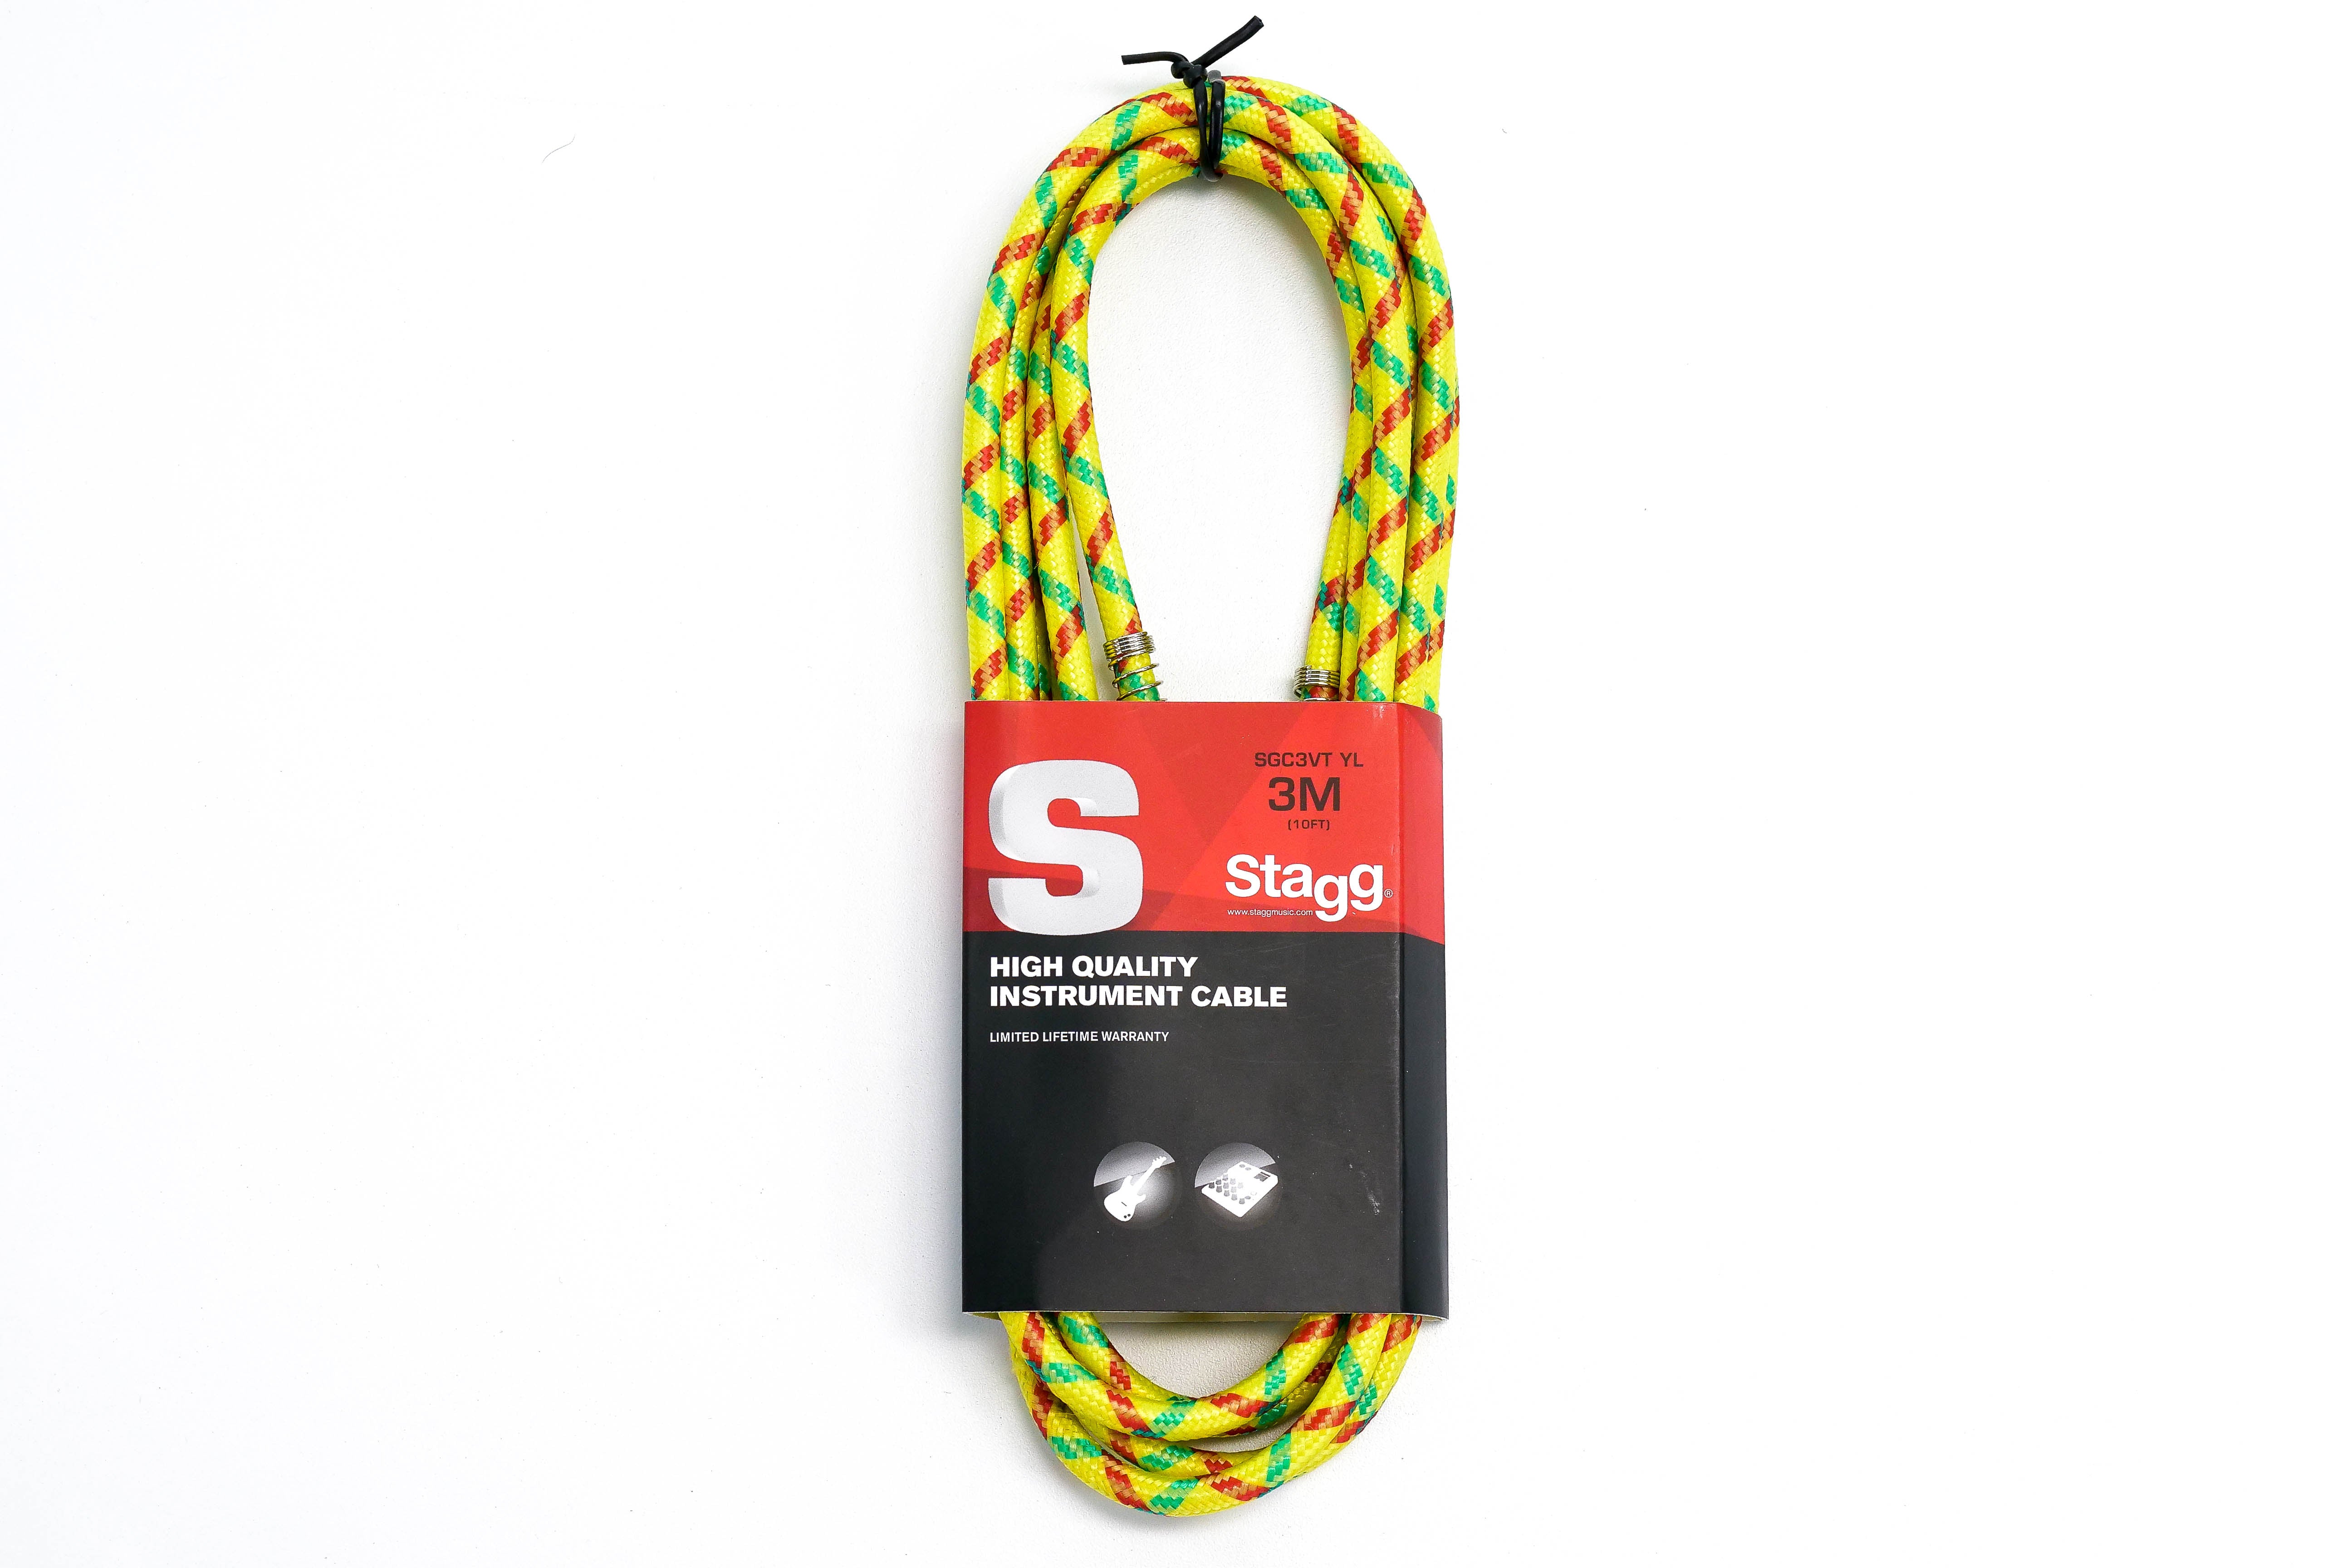 Stagg SGC3VT YL S-Series 1/4 Inch Yellow Vintweed Instrument Cable - 10 Feet